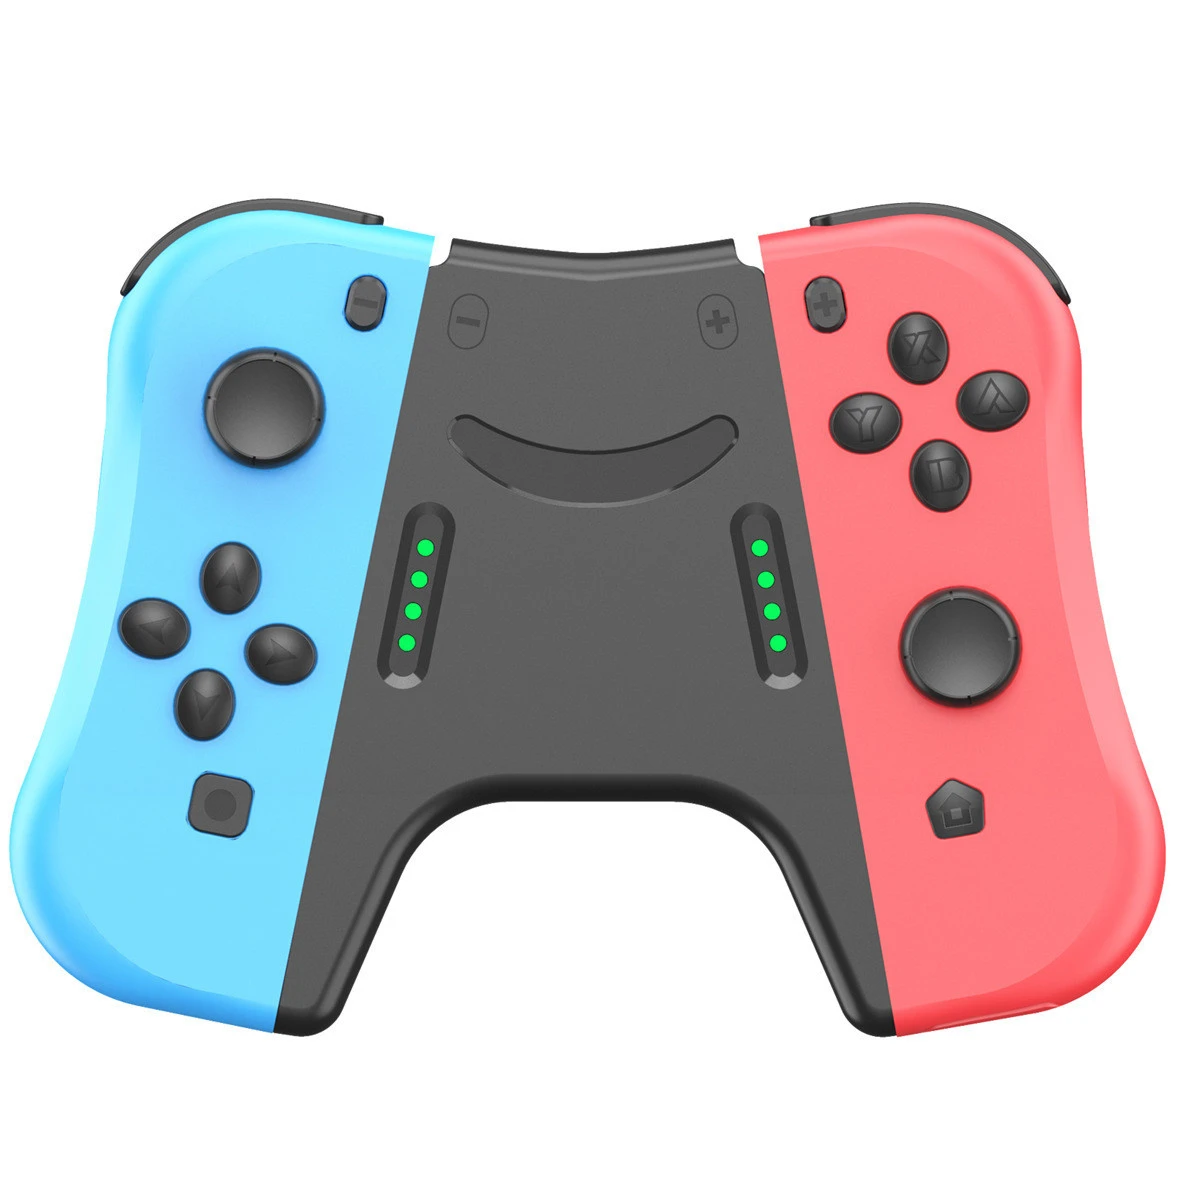 Travelcool 14 Colors Joy Con Controller for Nintendo BT Wireless Controller L/R Gamepad Joystick for Switch Joy-con